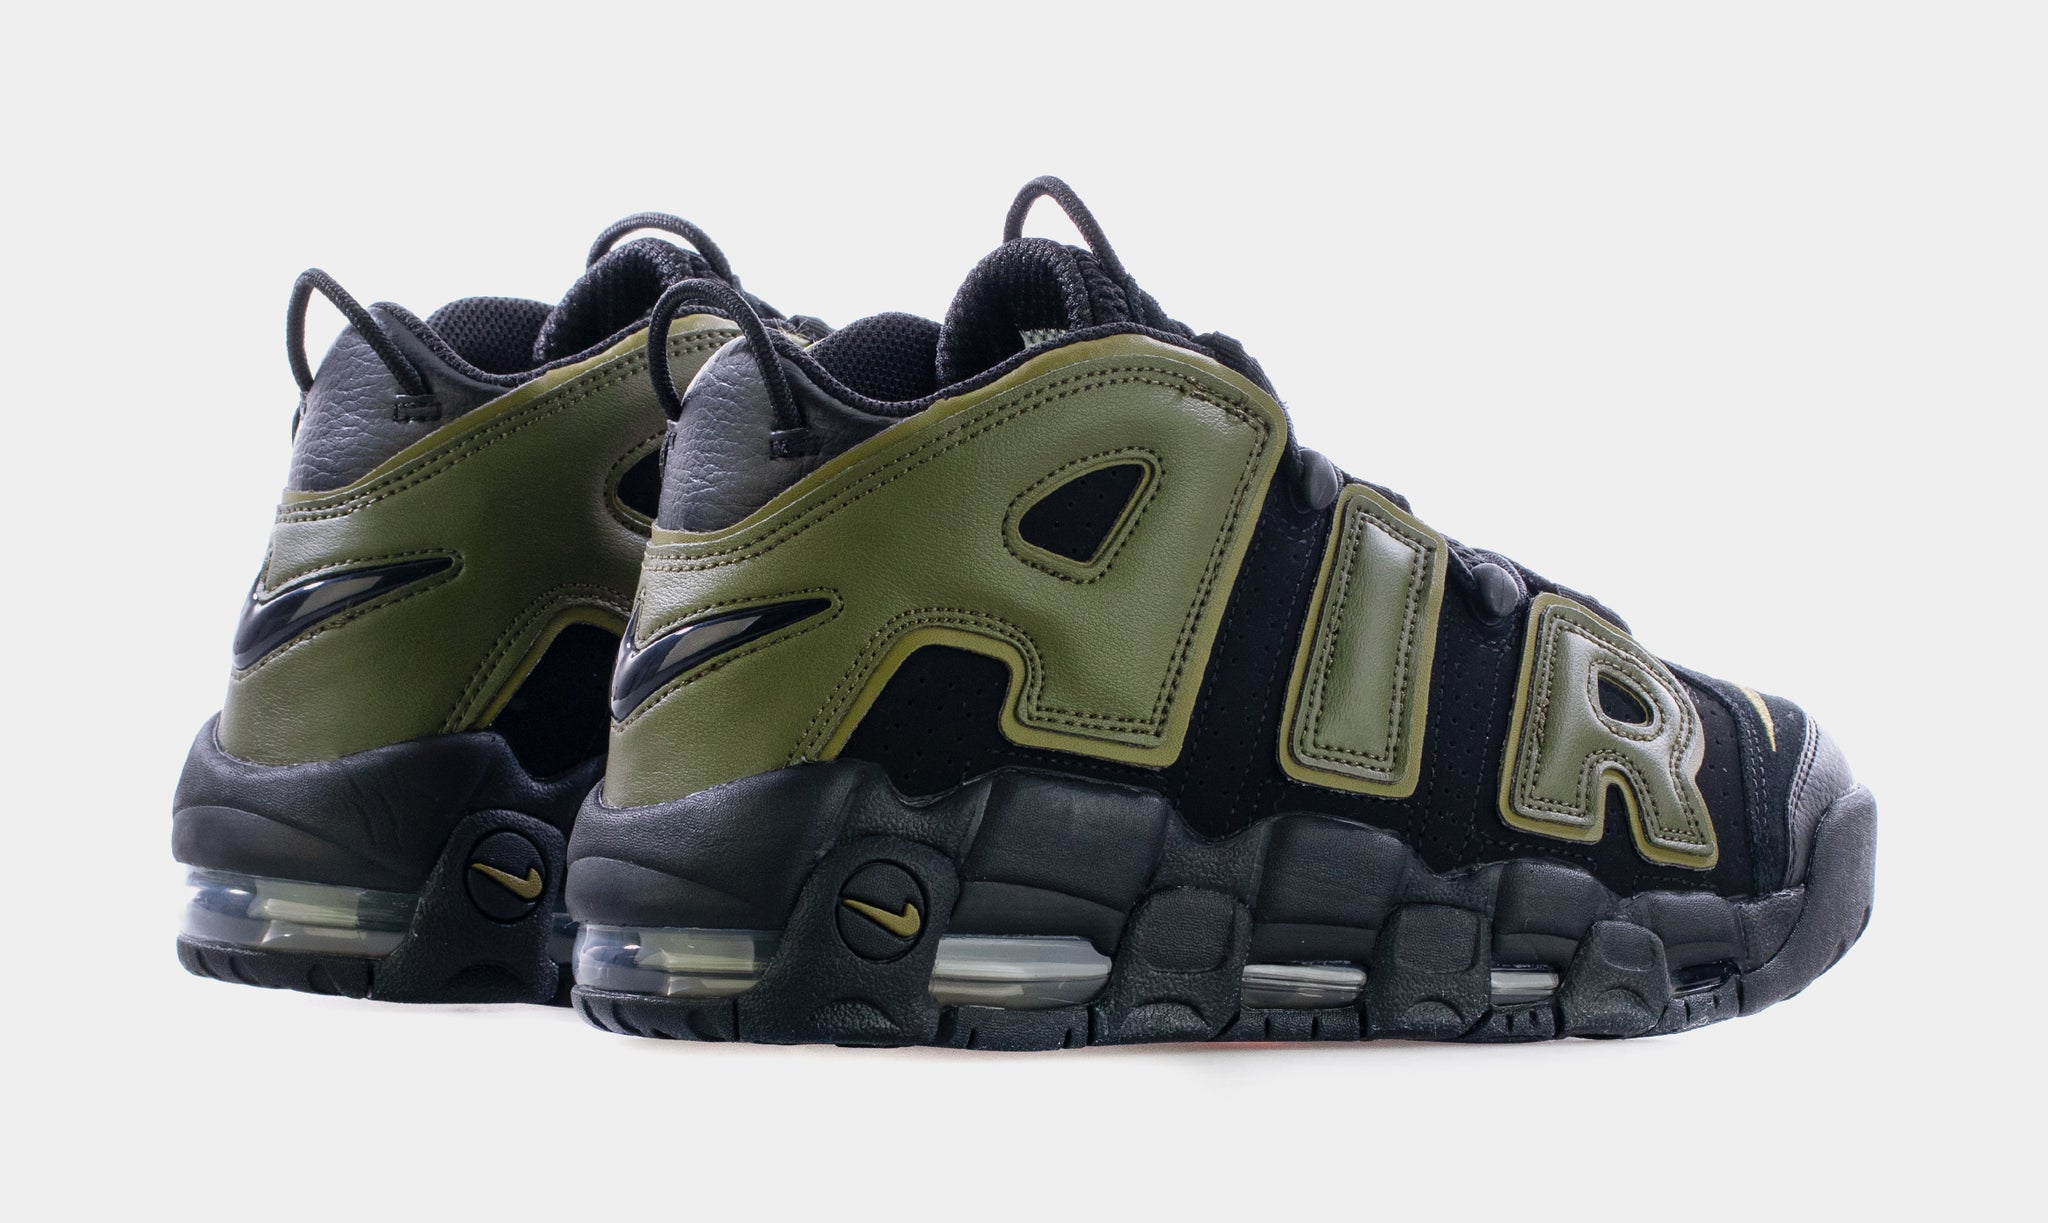 Leather Daily Wear Nike Air More Uptempo 96 Premium black Men's shoes